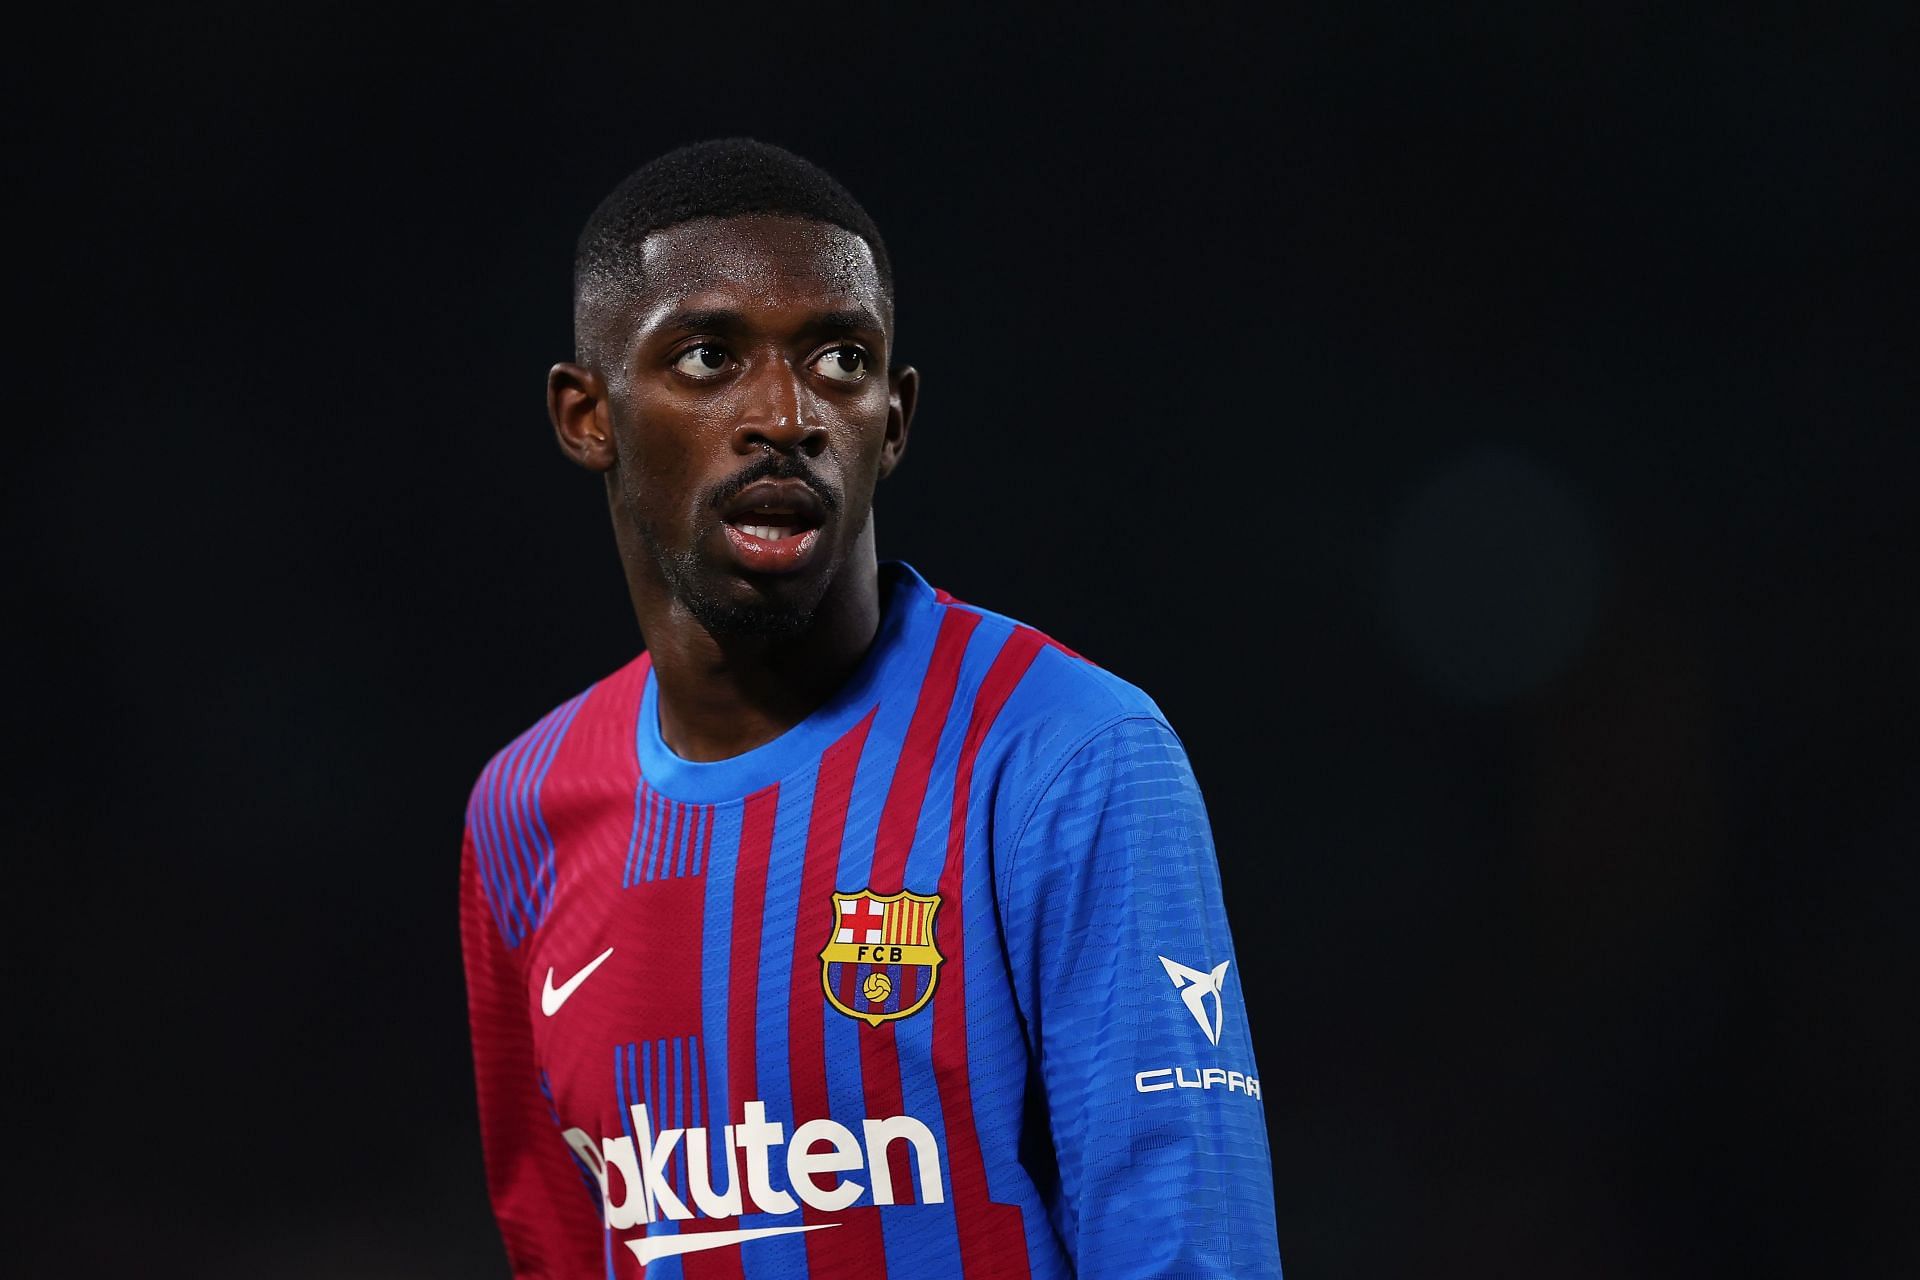 Ousmane Dembele is likely to leave the Camp Nou this summer.